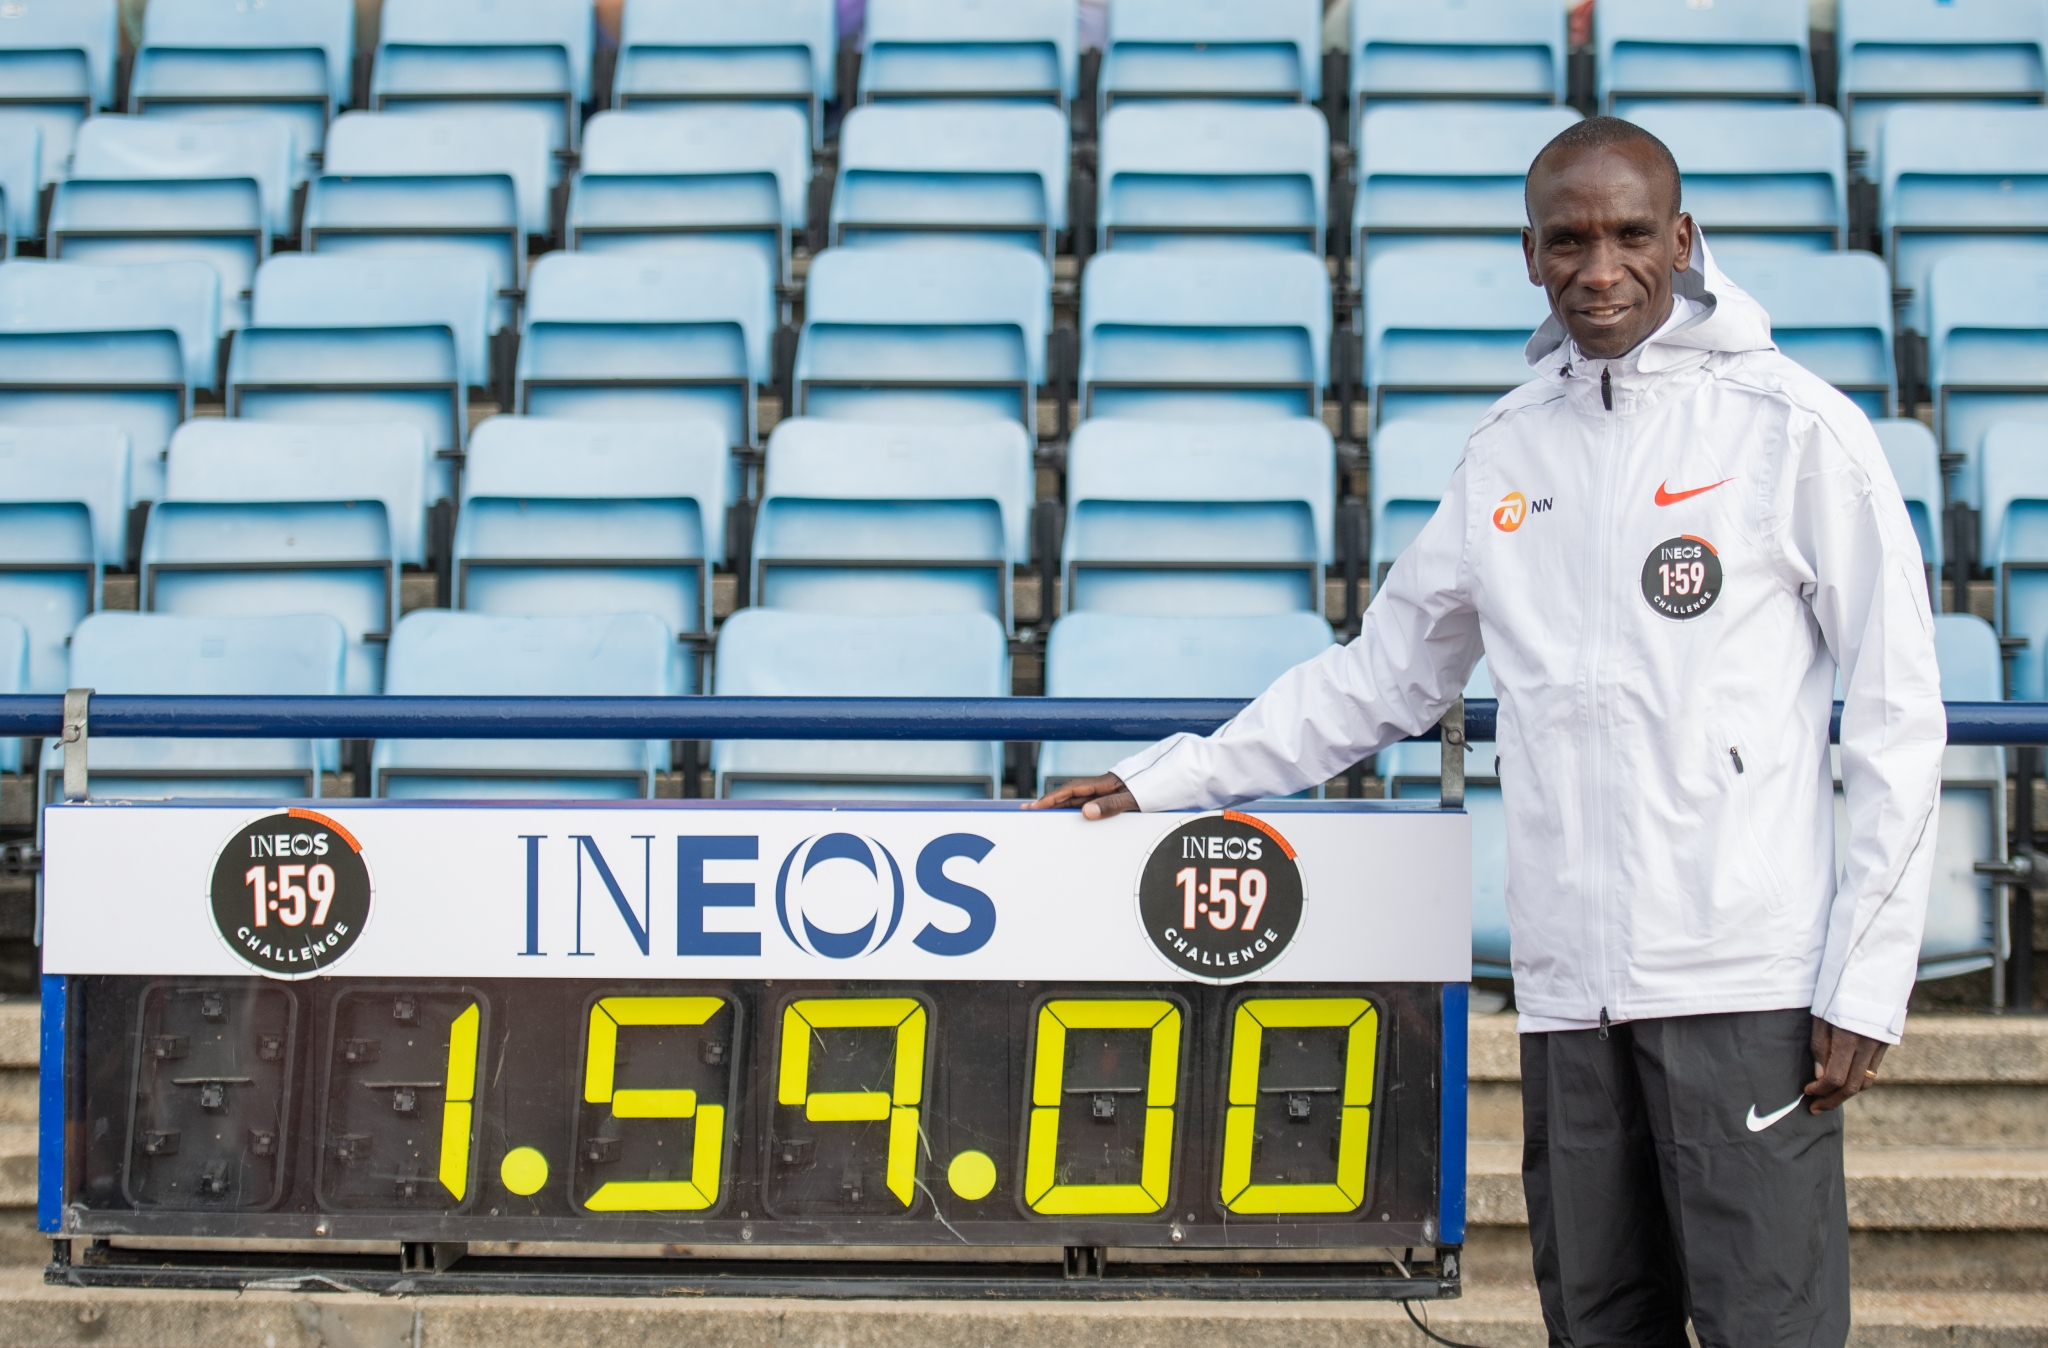 Eliud Kipchoge KEN, at the Iffley road running track on the 30th April 2019. Photo: Thomas Lovelock for london marathon events